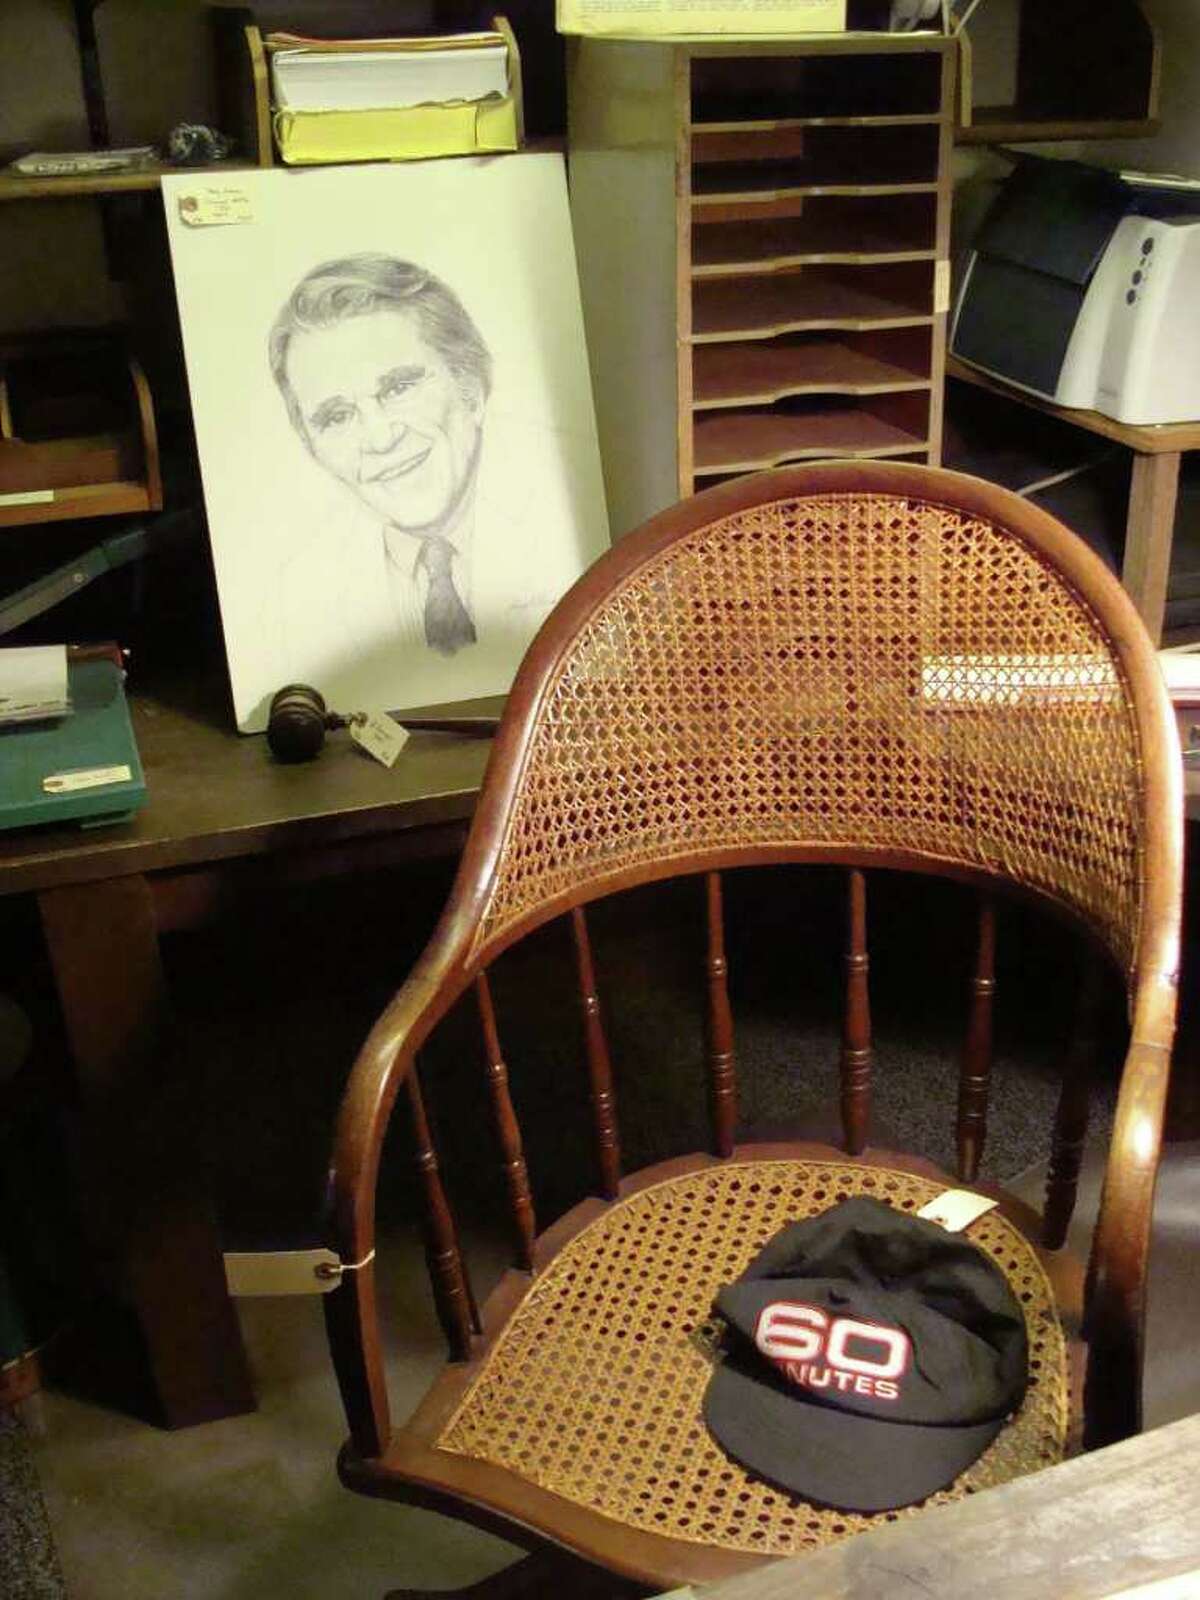 Andy Rooney's basement office chair in his Rowayton home, his "60 Mintues" cap and a portrait were among the items on sale Friday, the first day of a three-day estate sale.